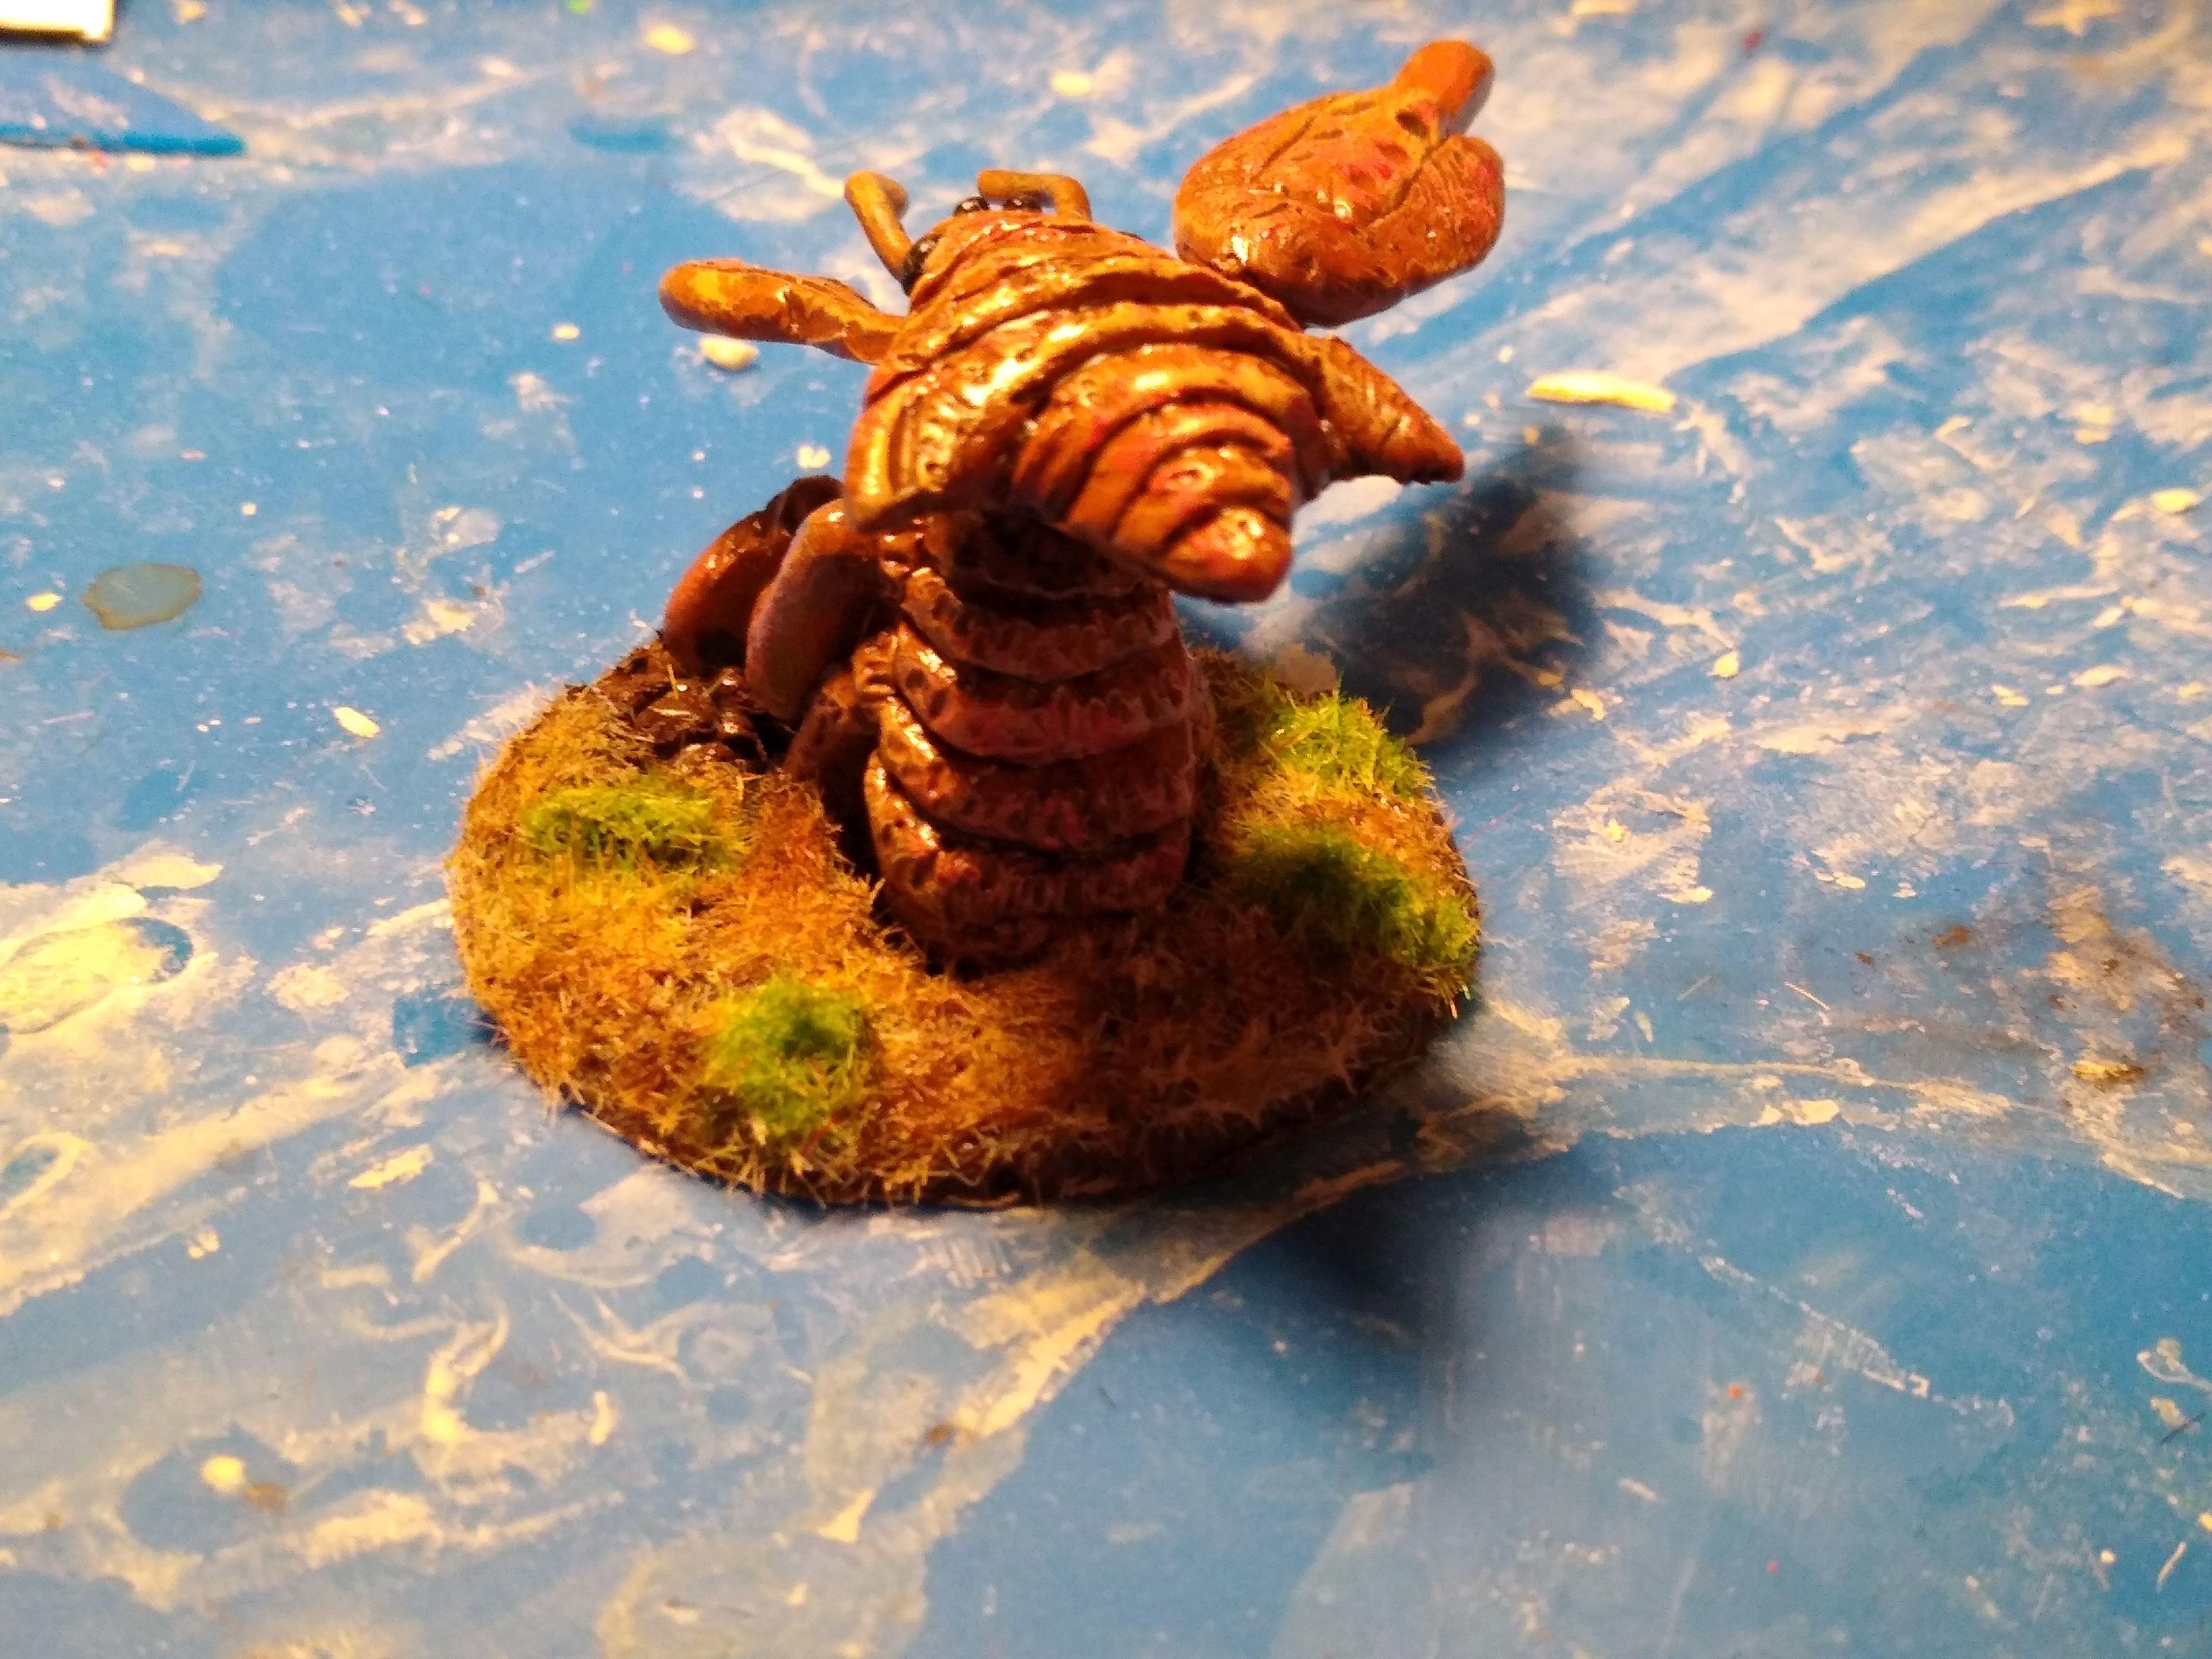 Ankheg, Dragon, Dungeons, Dungeons And Dragons, Mini, Miniature, Monster, Sculpting